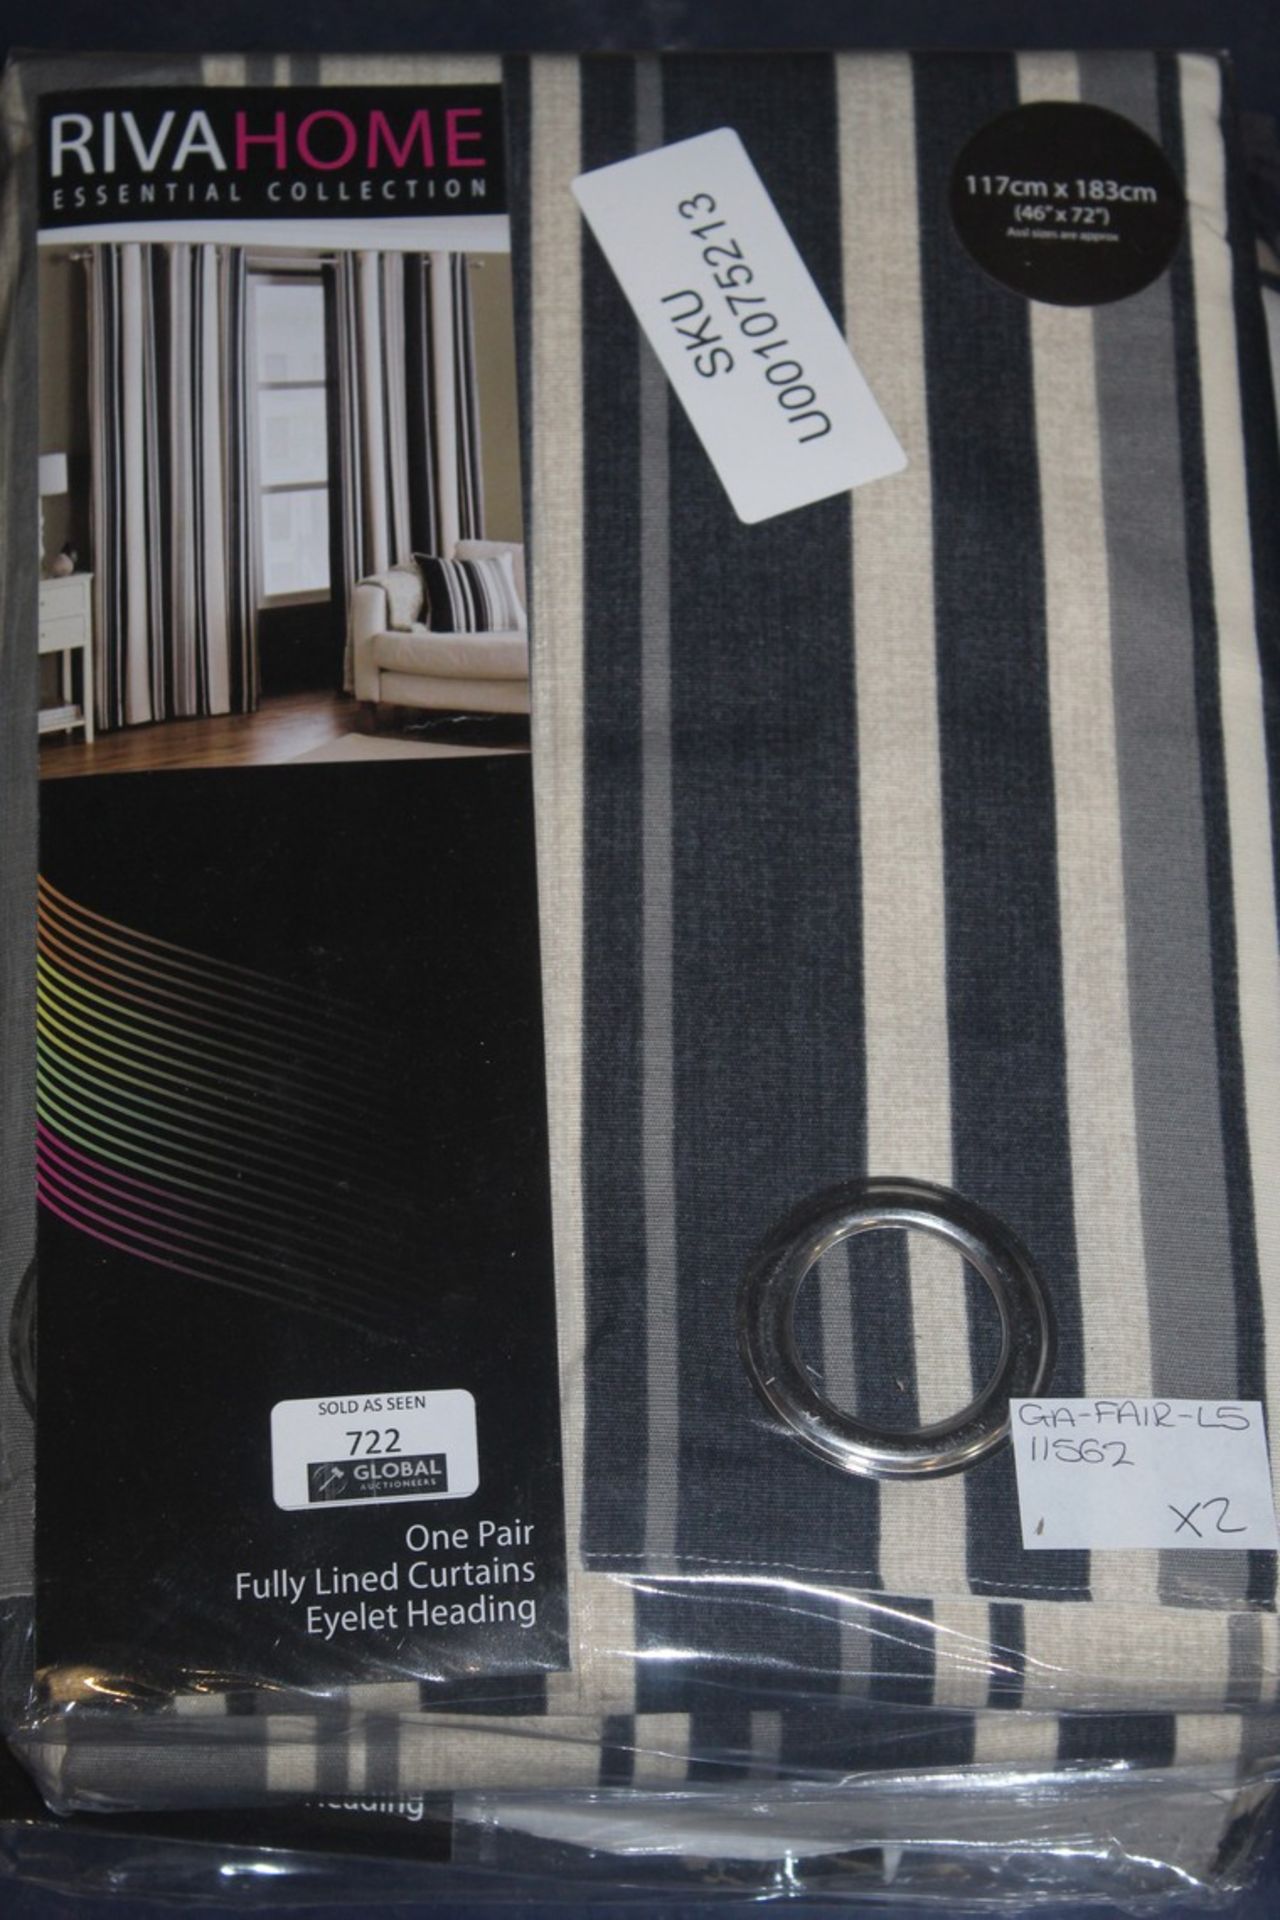 Pairs Of Reava Home 46 x 72" Stripe Eyelet Headed Curtains RRP £35 Each (Pictures Are For